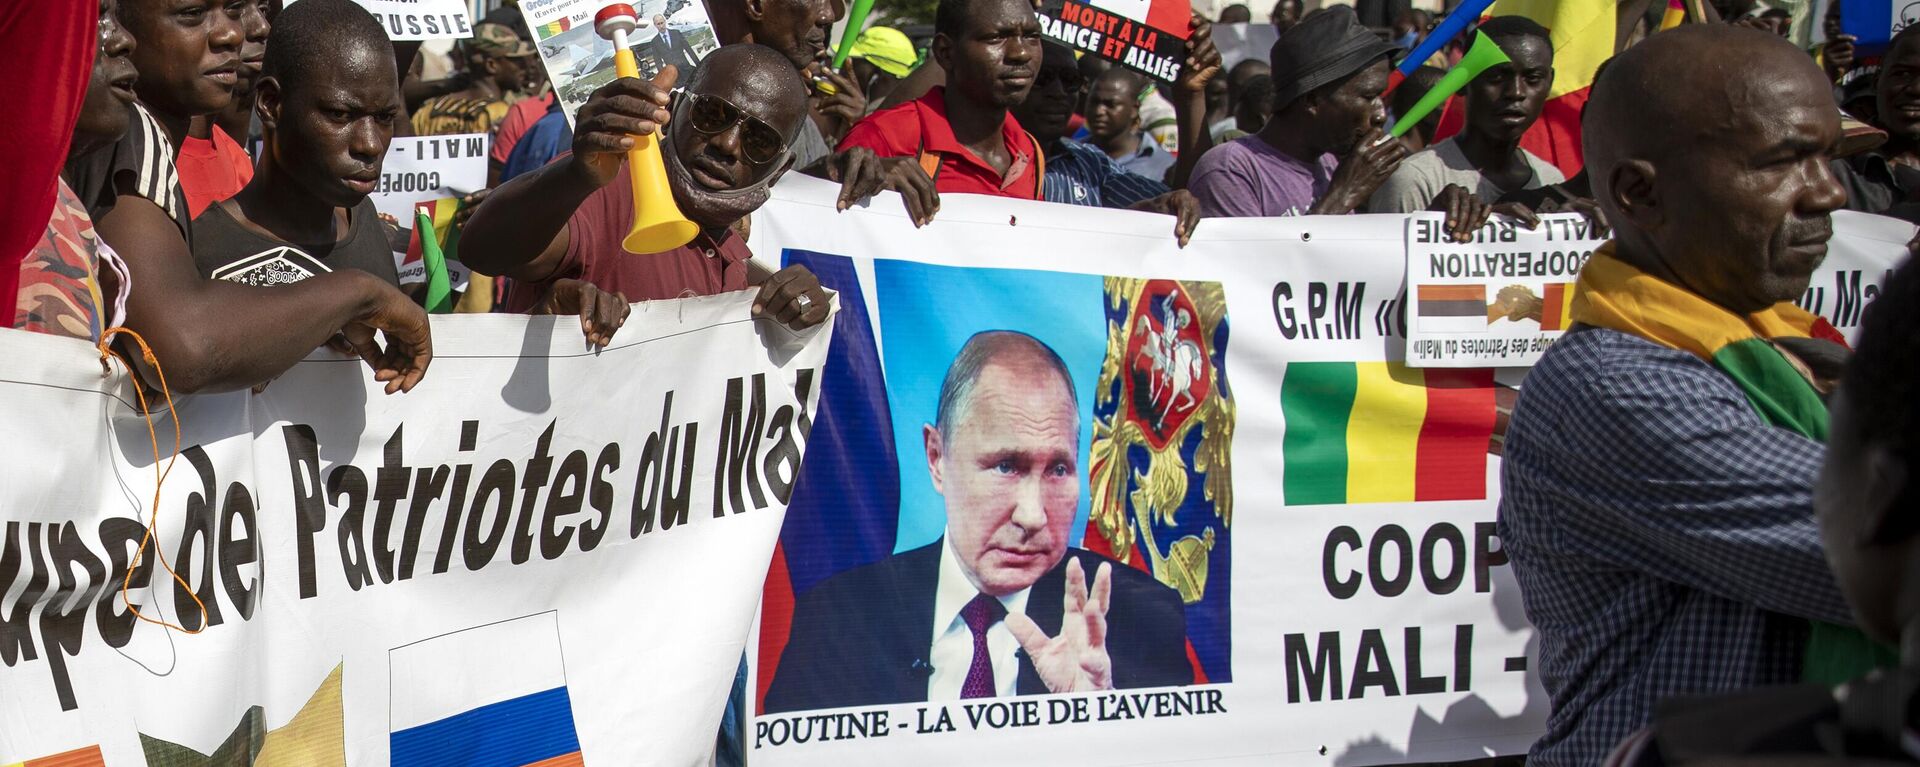 Malians demonstrate against France and in support of Russia on the 60th anniversary of the independence of the Republic of Mali in 1960, in Bamako, Mali, Sept. 22, 2020.  - Sputnik International, 1920, 11.01.2023